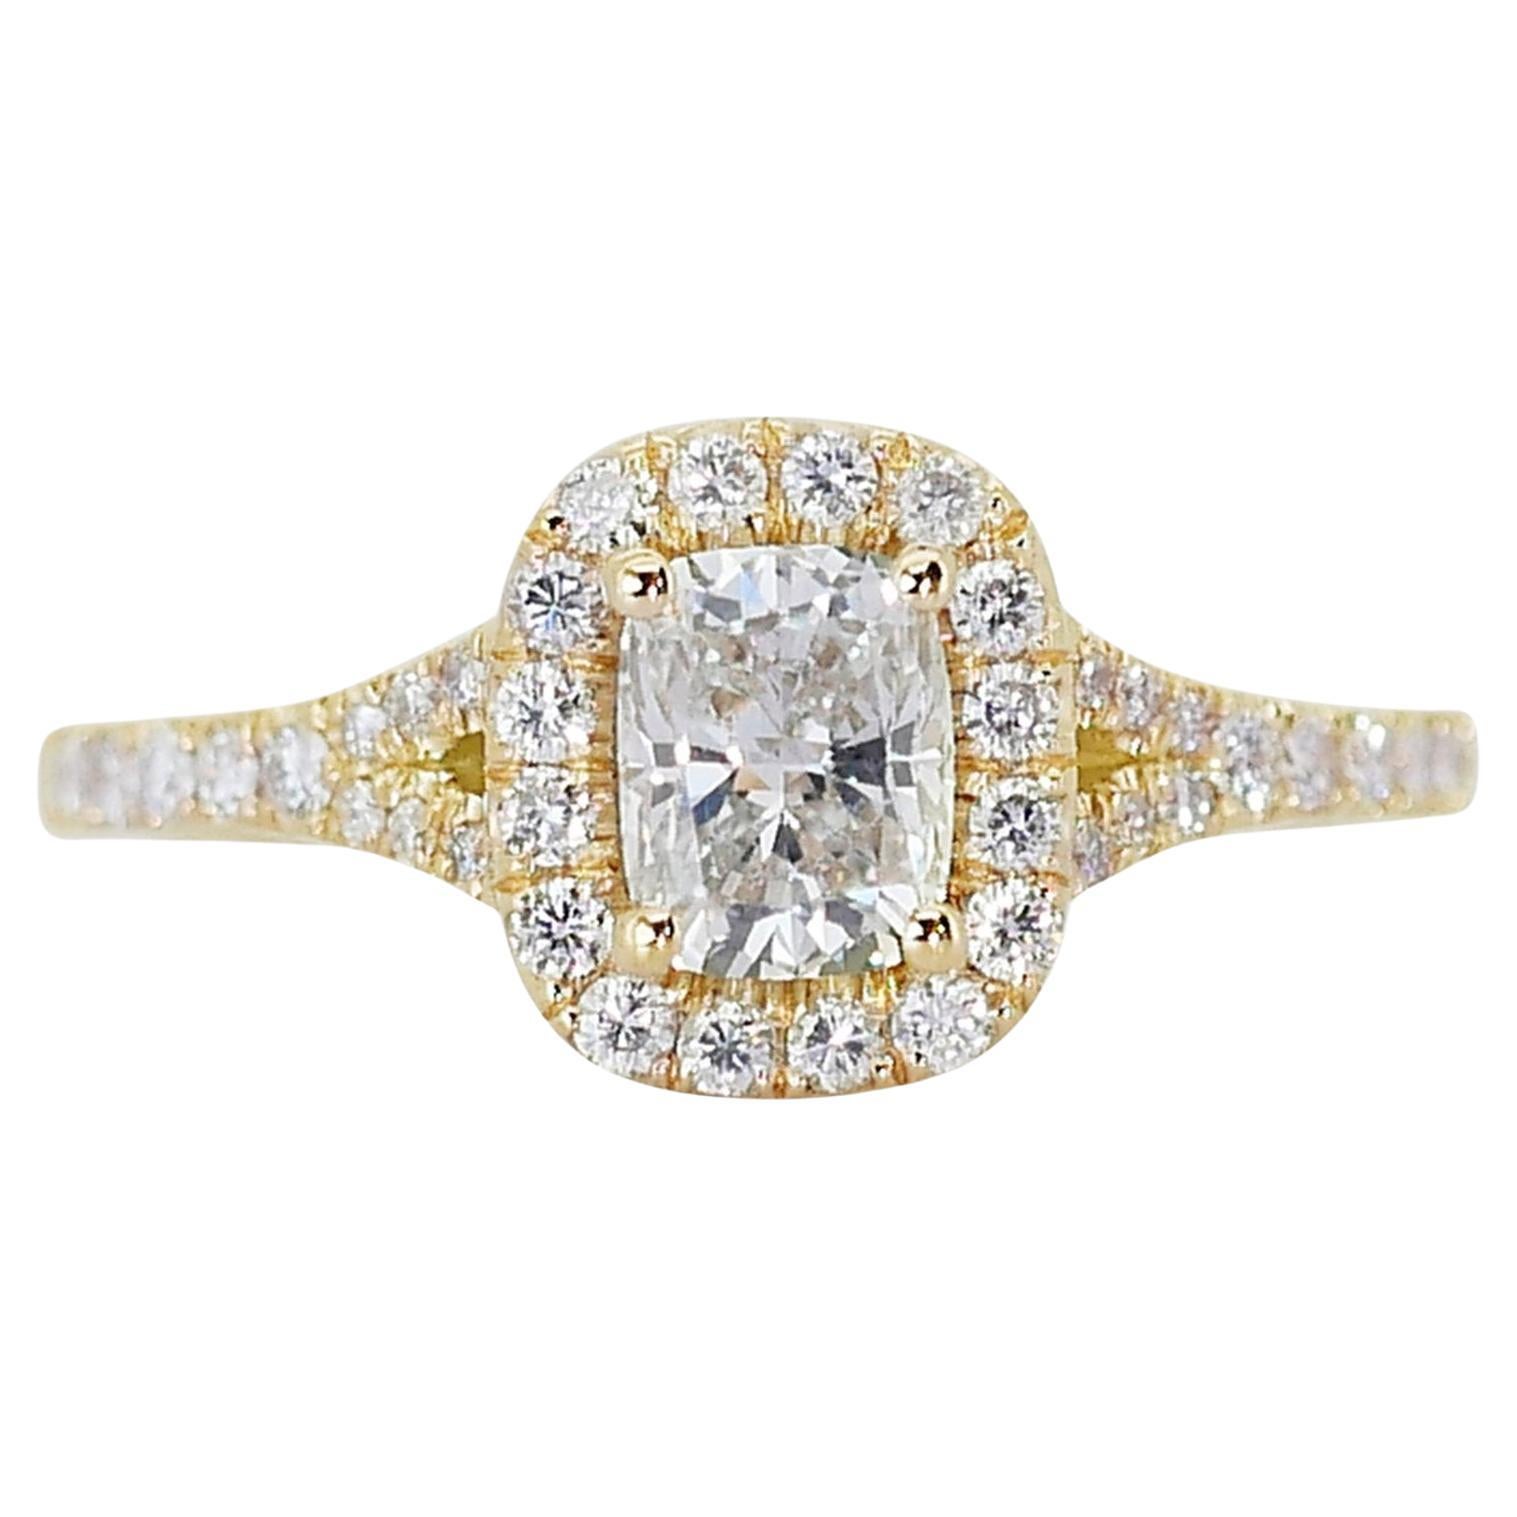 Brilliant 1.33ct Diamond Halo Ring in 18k Yellow Gold – GIA Certified For Sale